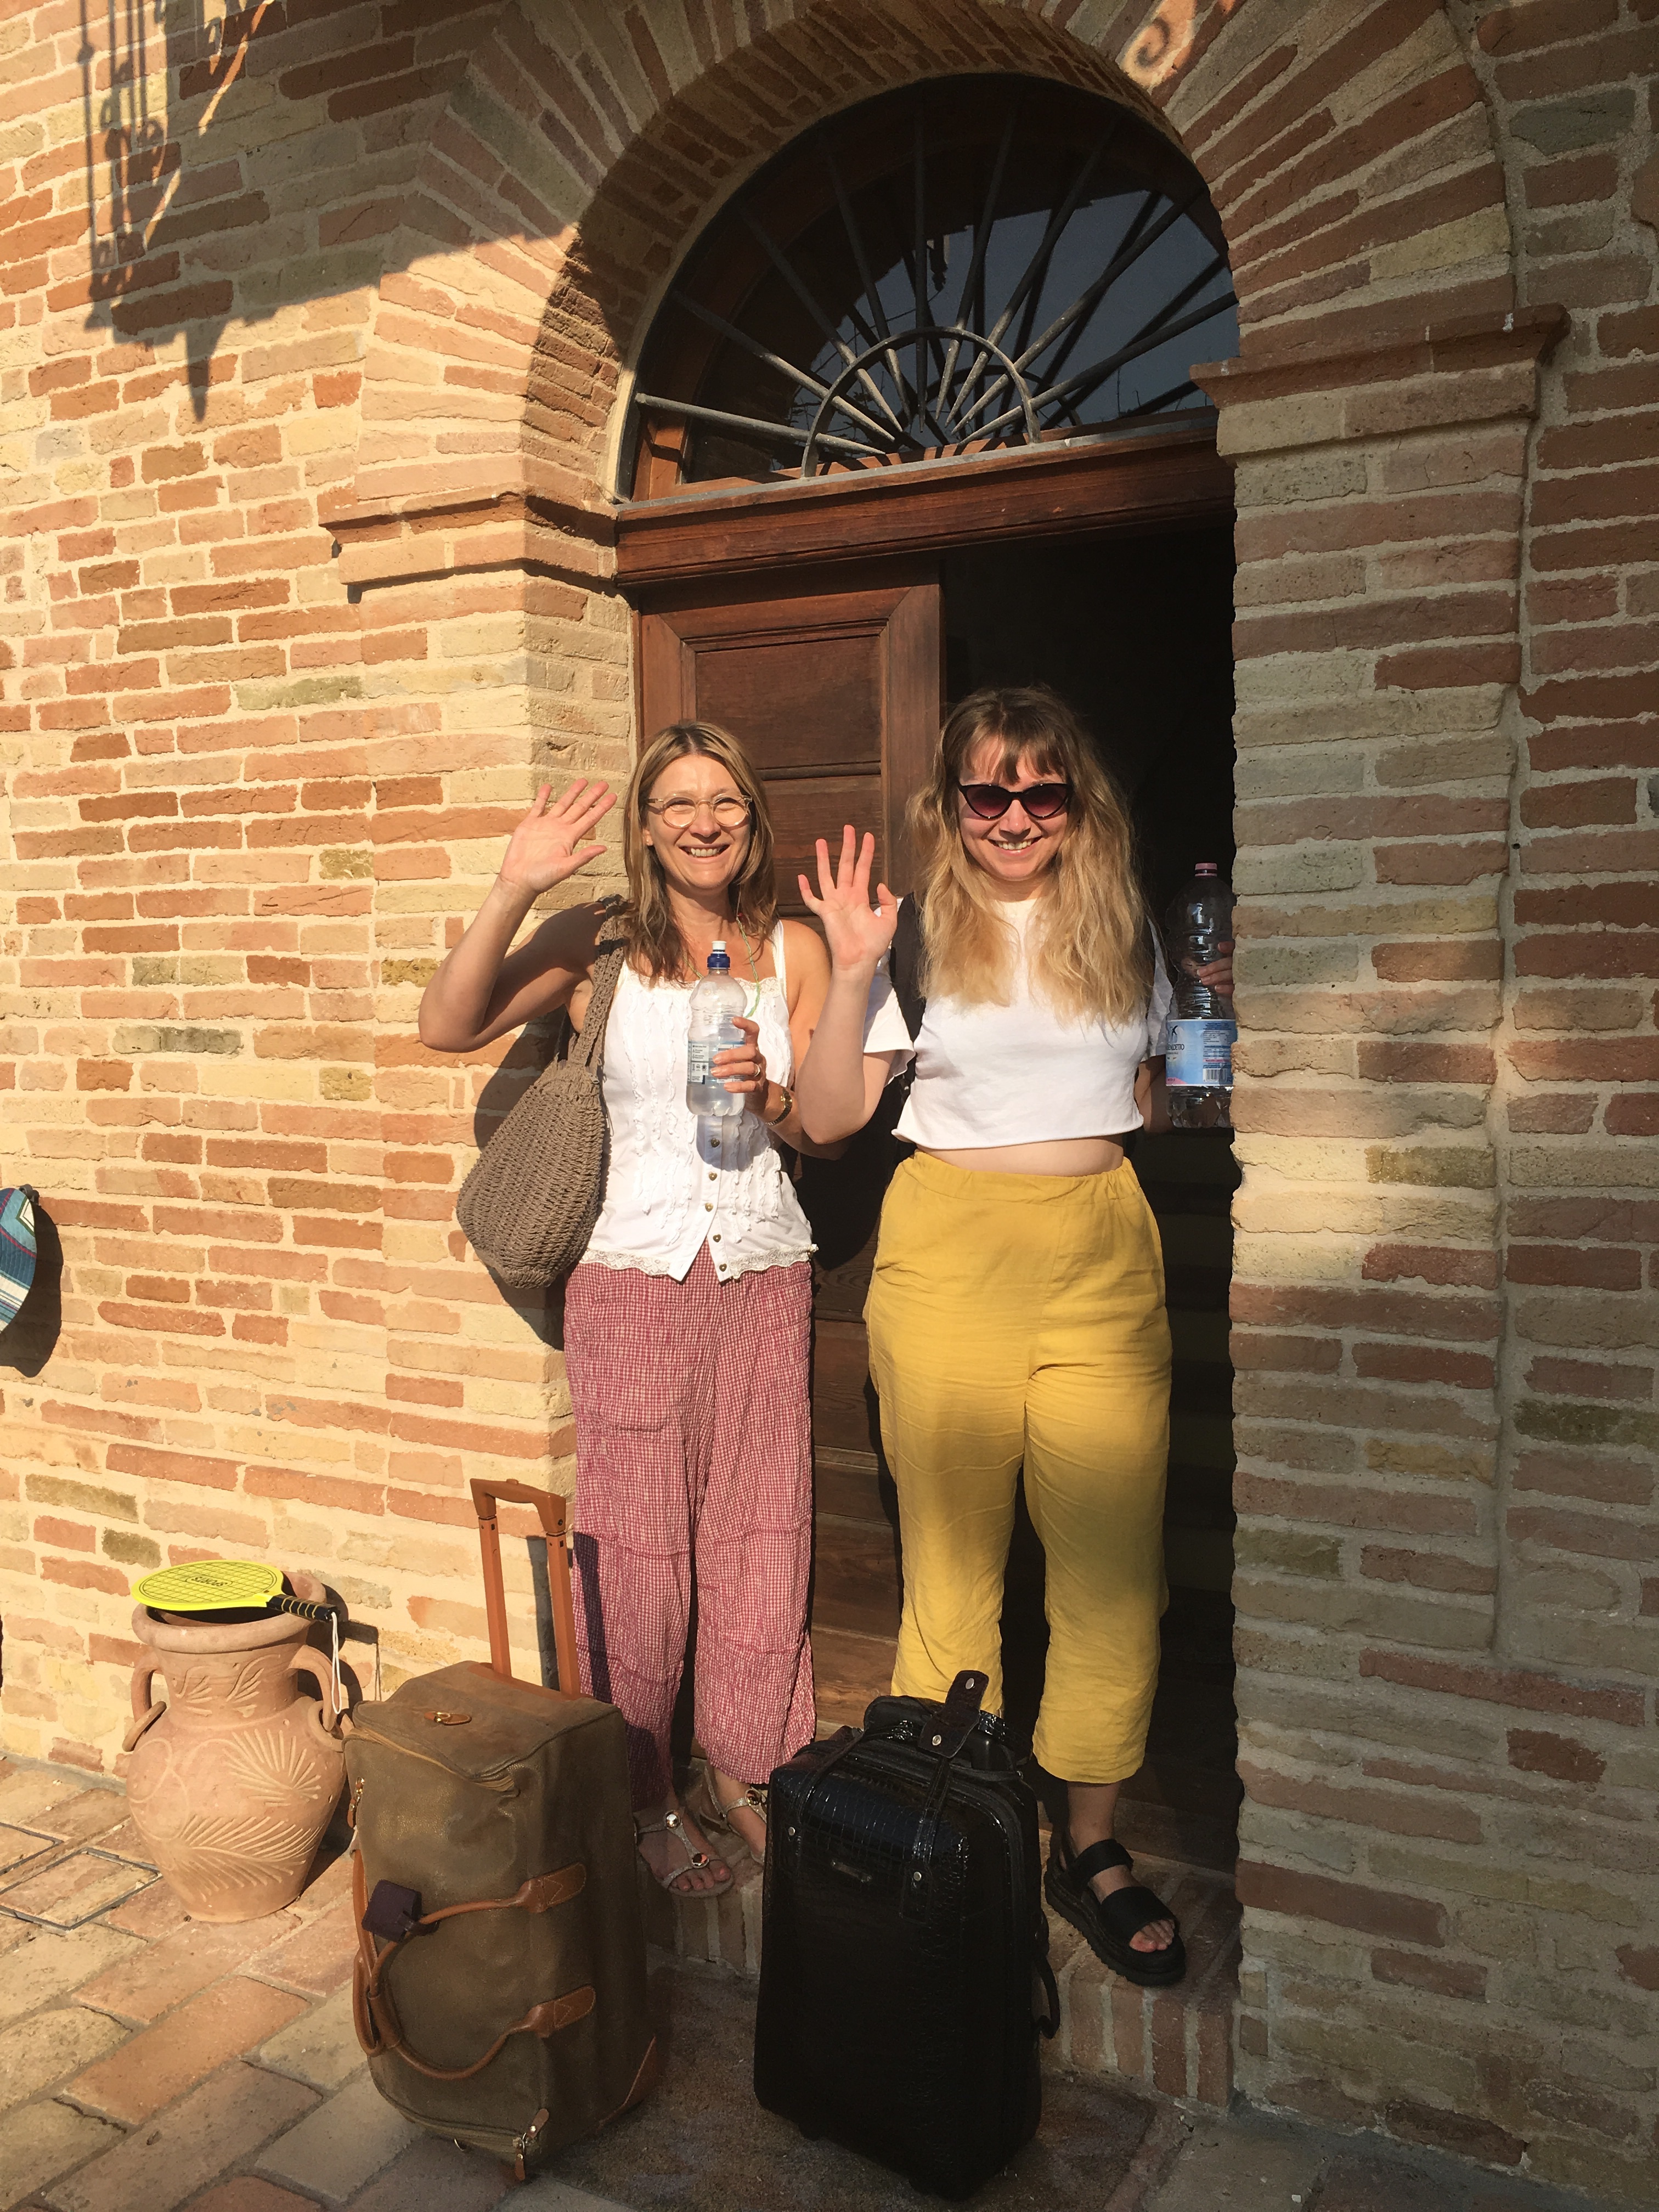 Villa Pedossa, Italy - was this coming or going? Emma and Sue are heading off I think!